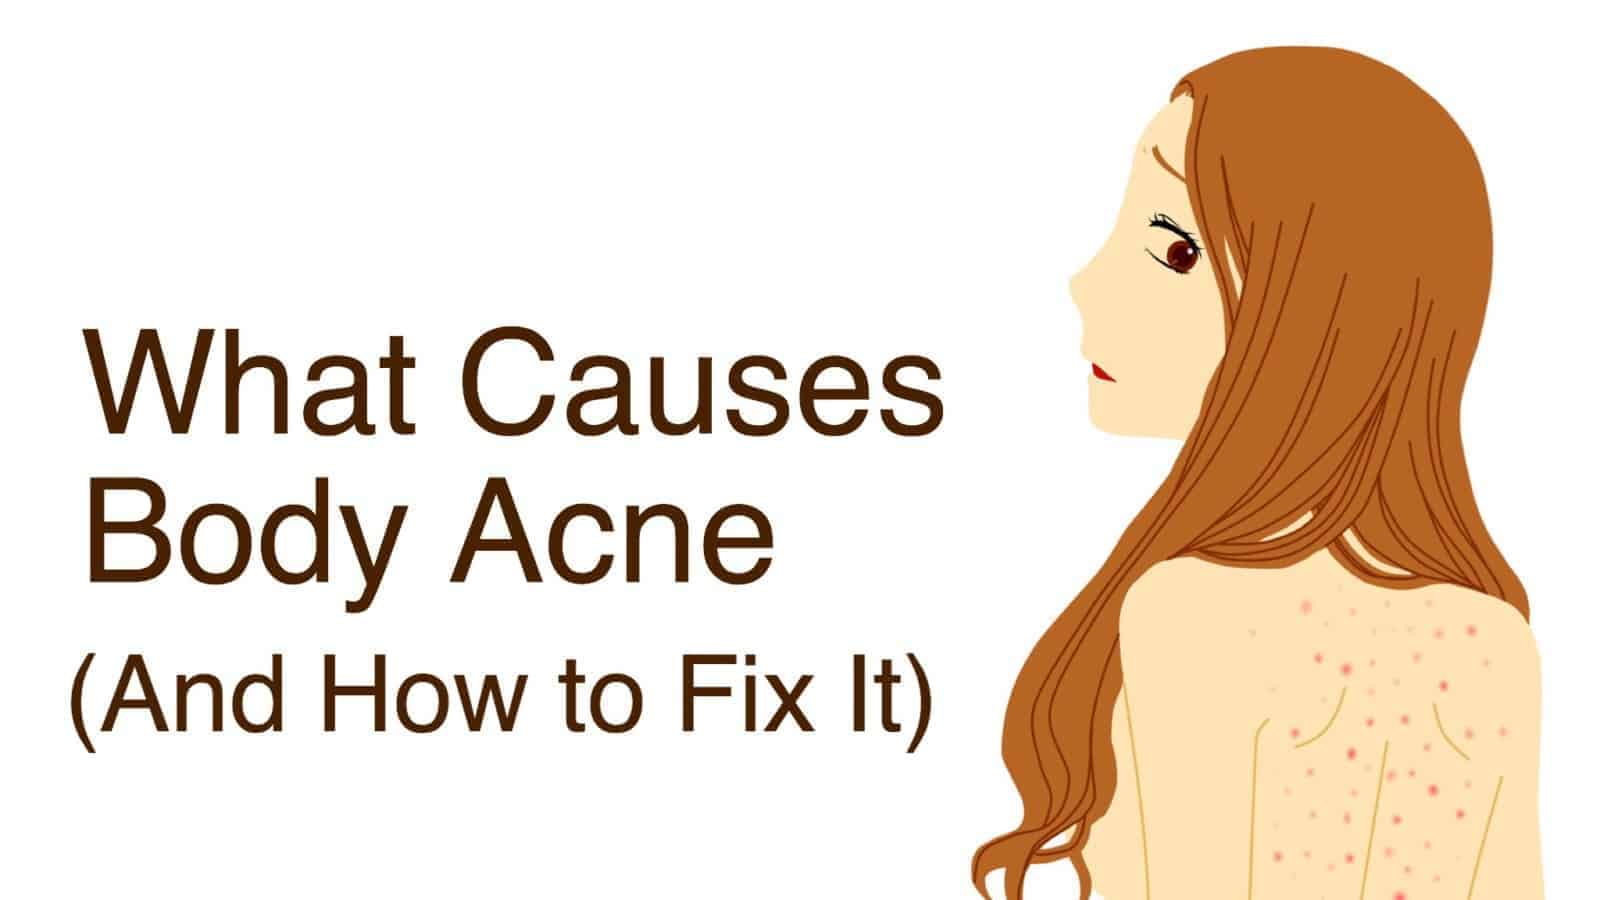 What Causes Body Acne (And How to Fix It)